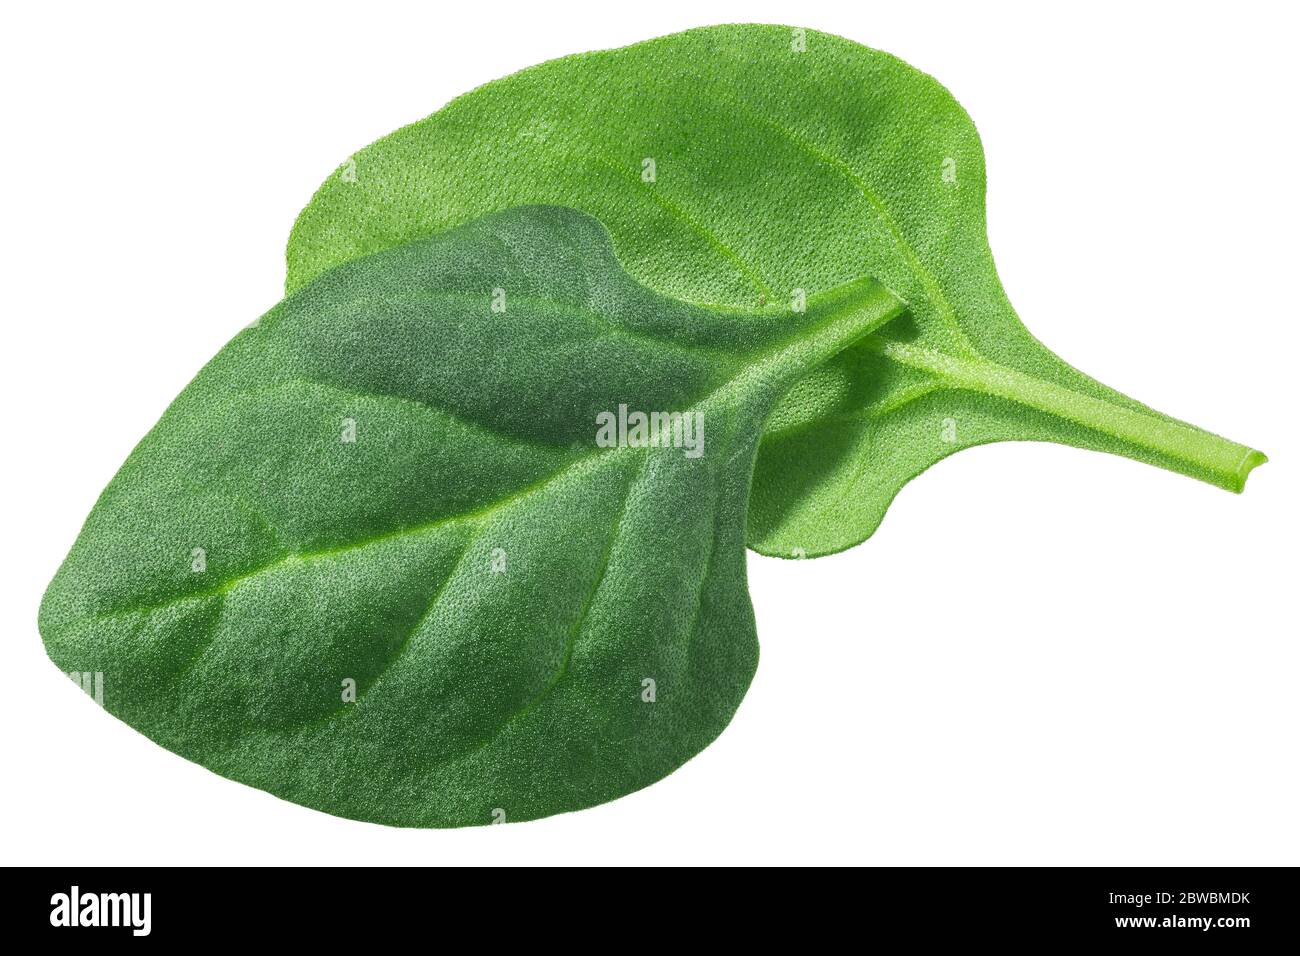 New Zealand Spinach leaves (Tetragonia tetragonoides foliage) isolated, top view Stock Photo